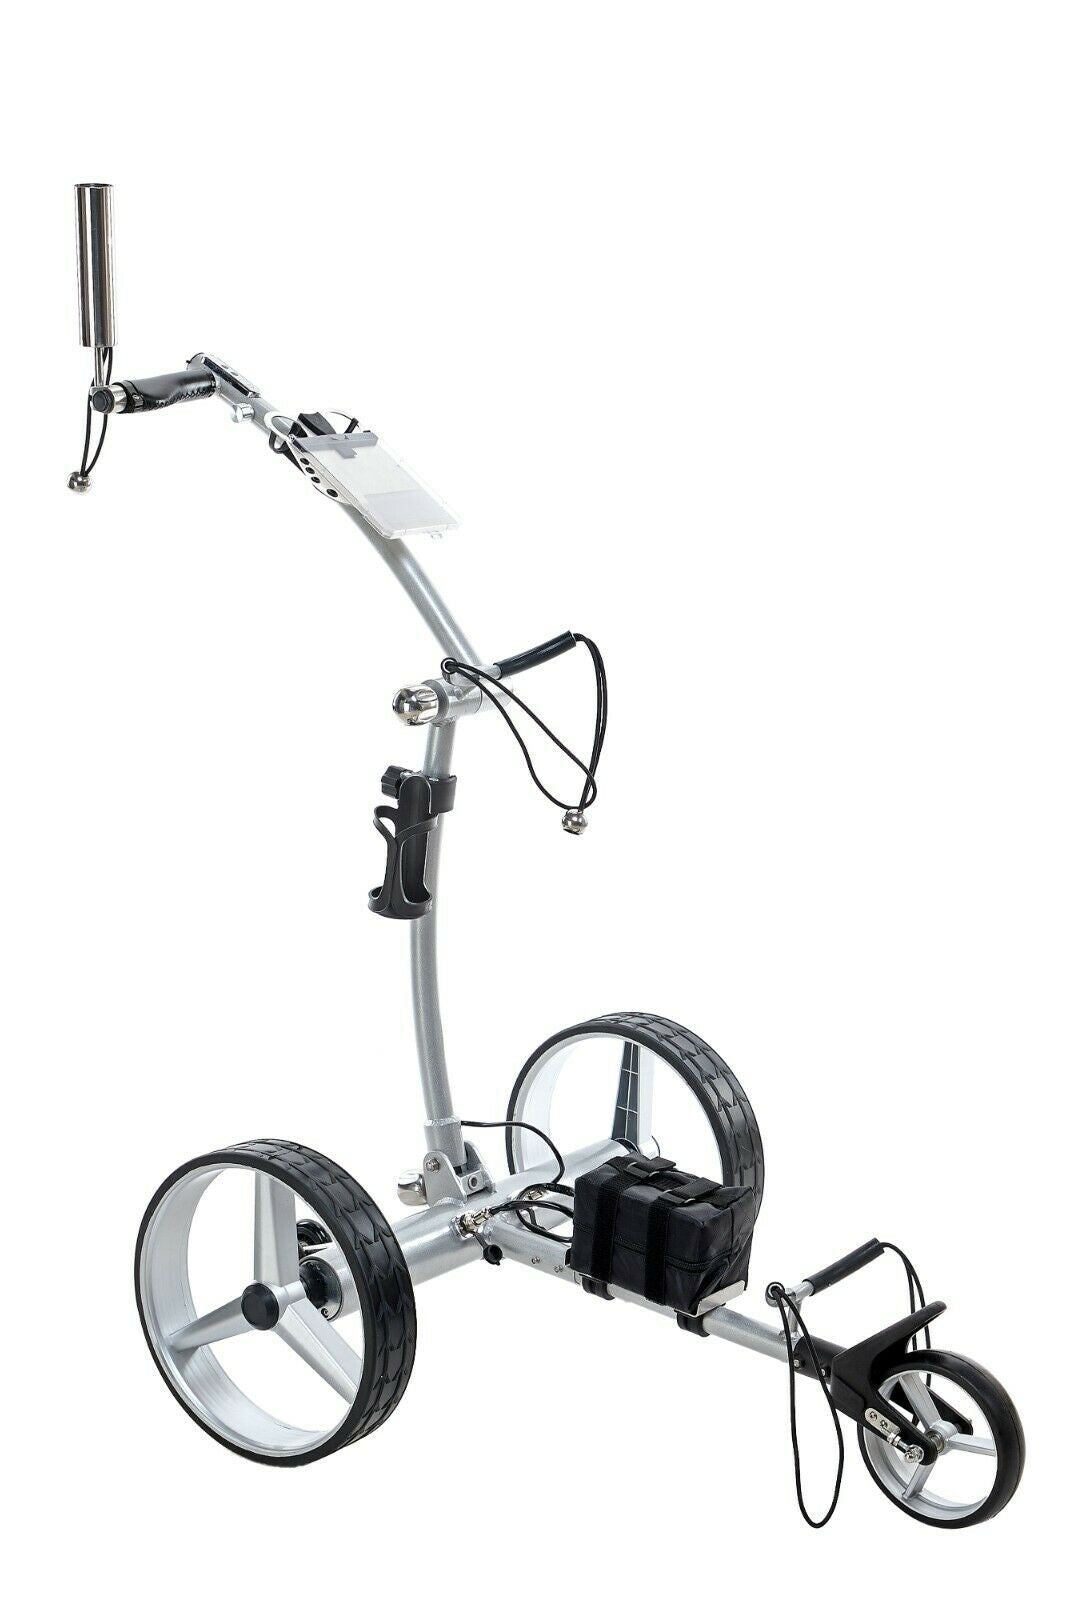 Introducing TopCaddy M1: The Revolutionary Remote Lithium Battery Trolley